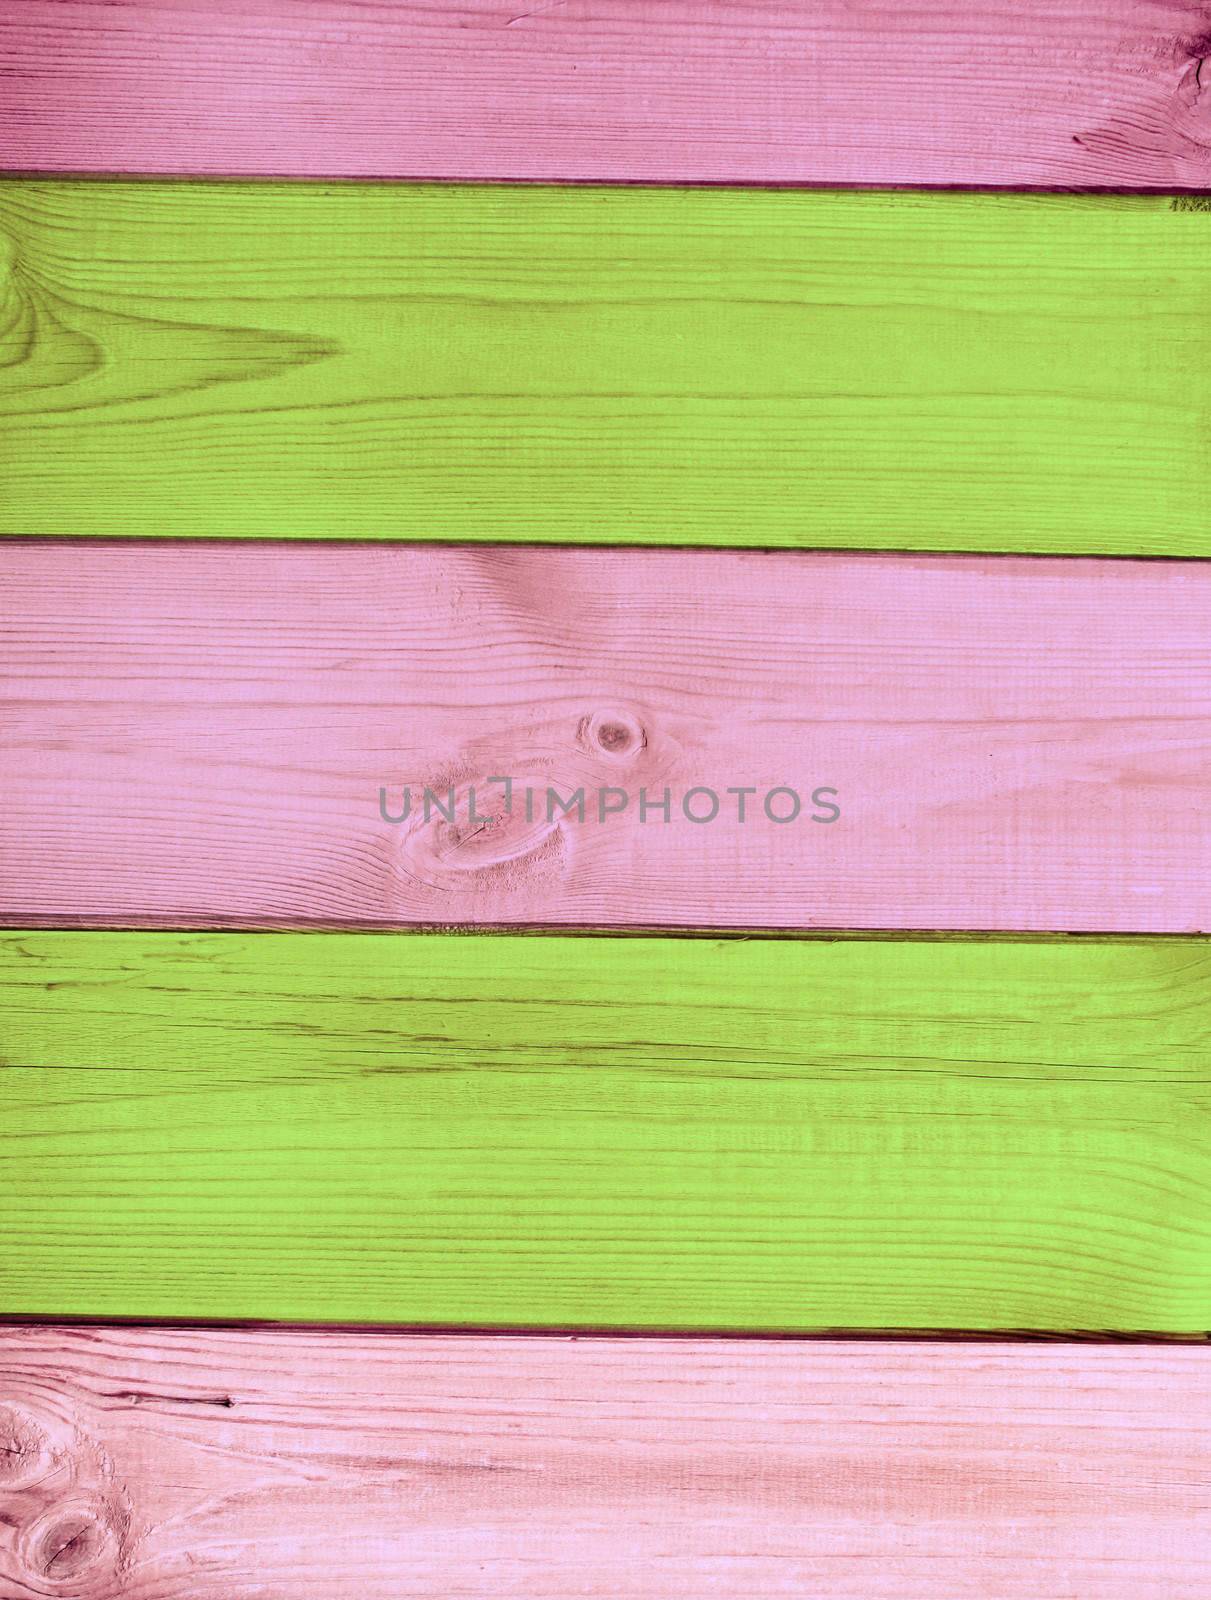 Texture - old wooden boards of multicolor